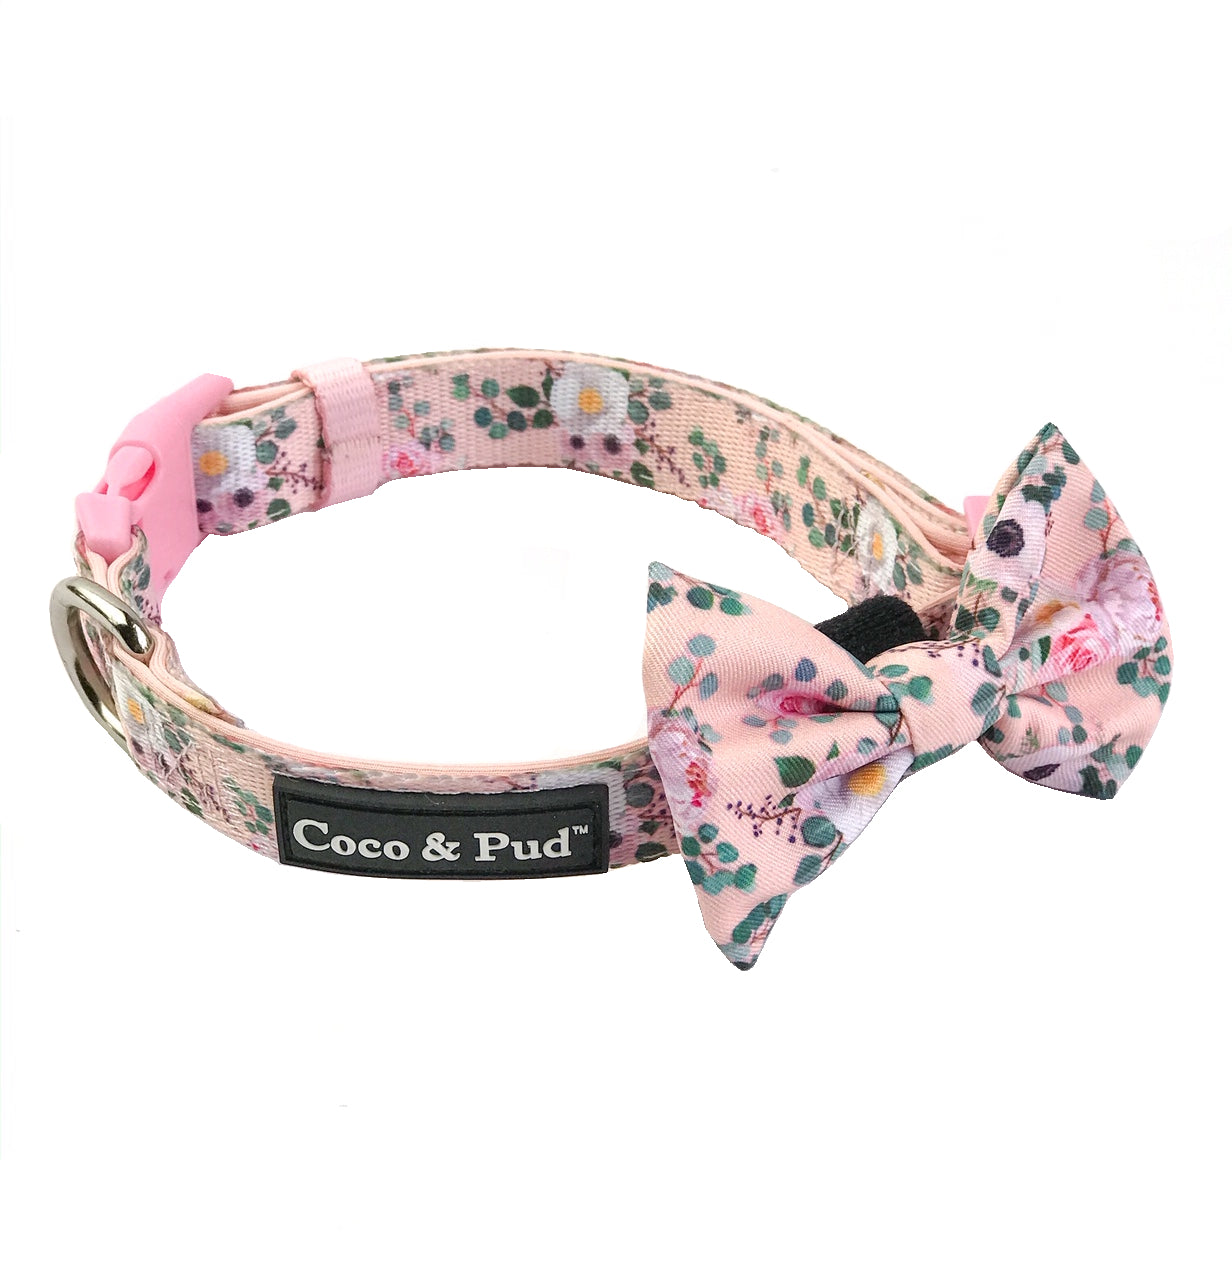 Coco & Pud Provence Rose Collar & Bow tie